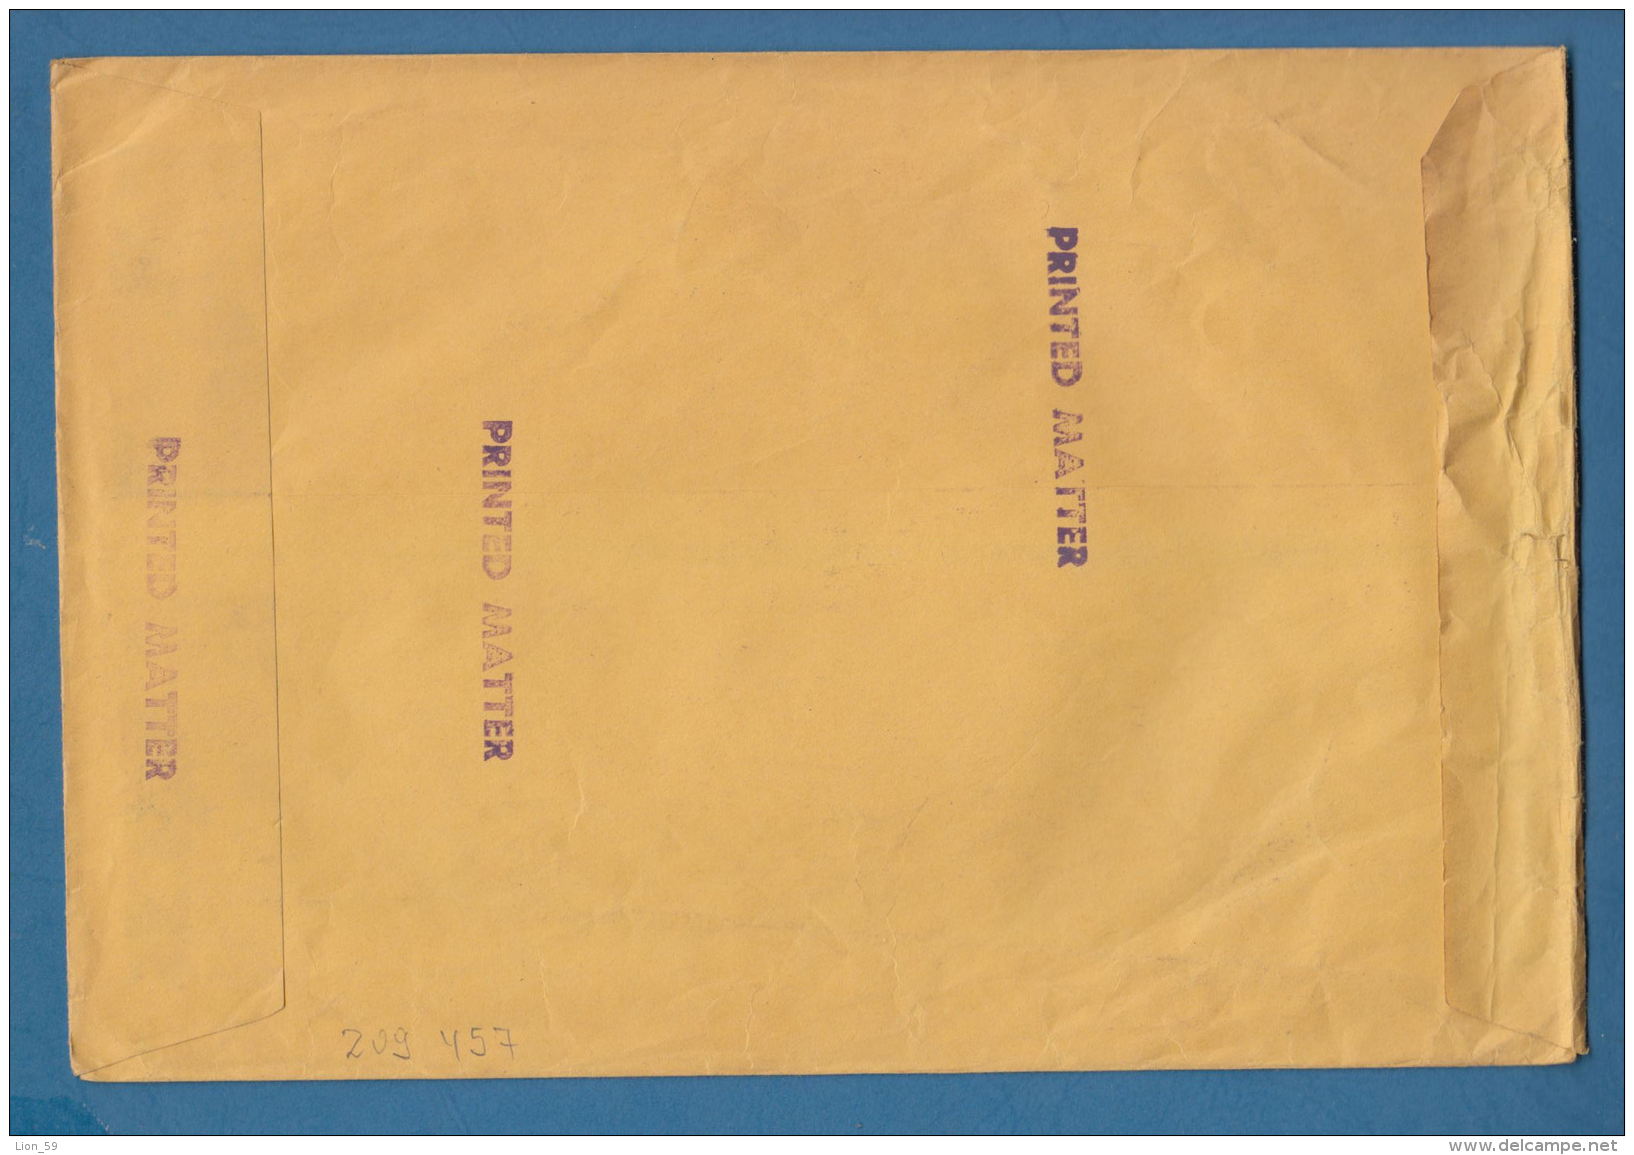 209457 / 1991 - 1.50 - Franking Labels DOWNSVIEW ONT. - SOFIA  , Canada Kanada - Covers & Documents